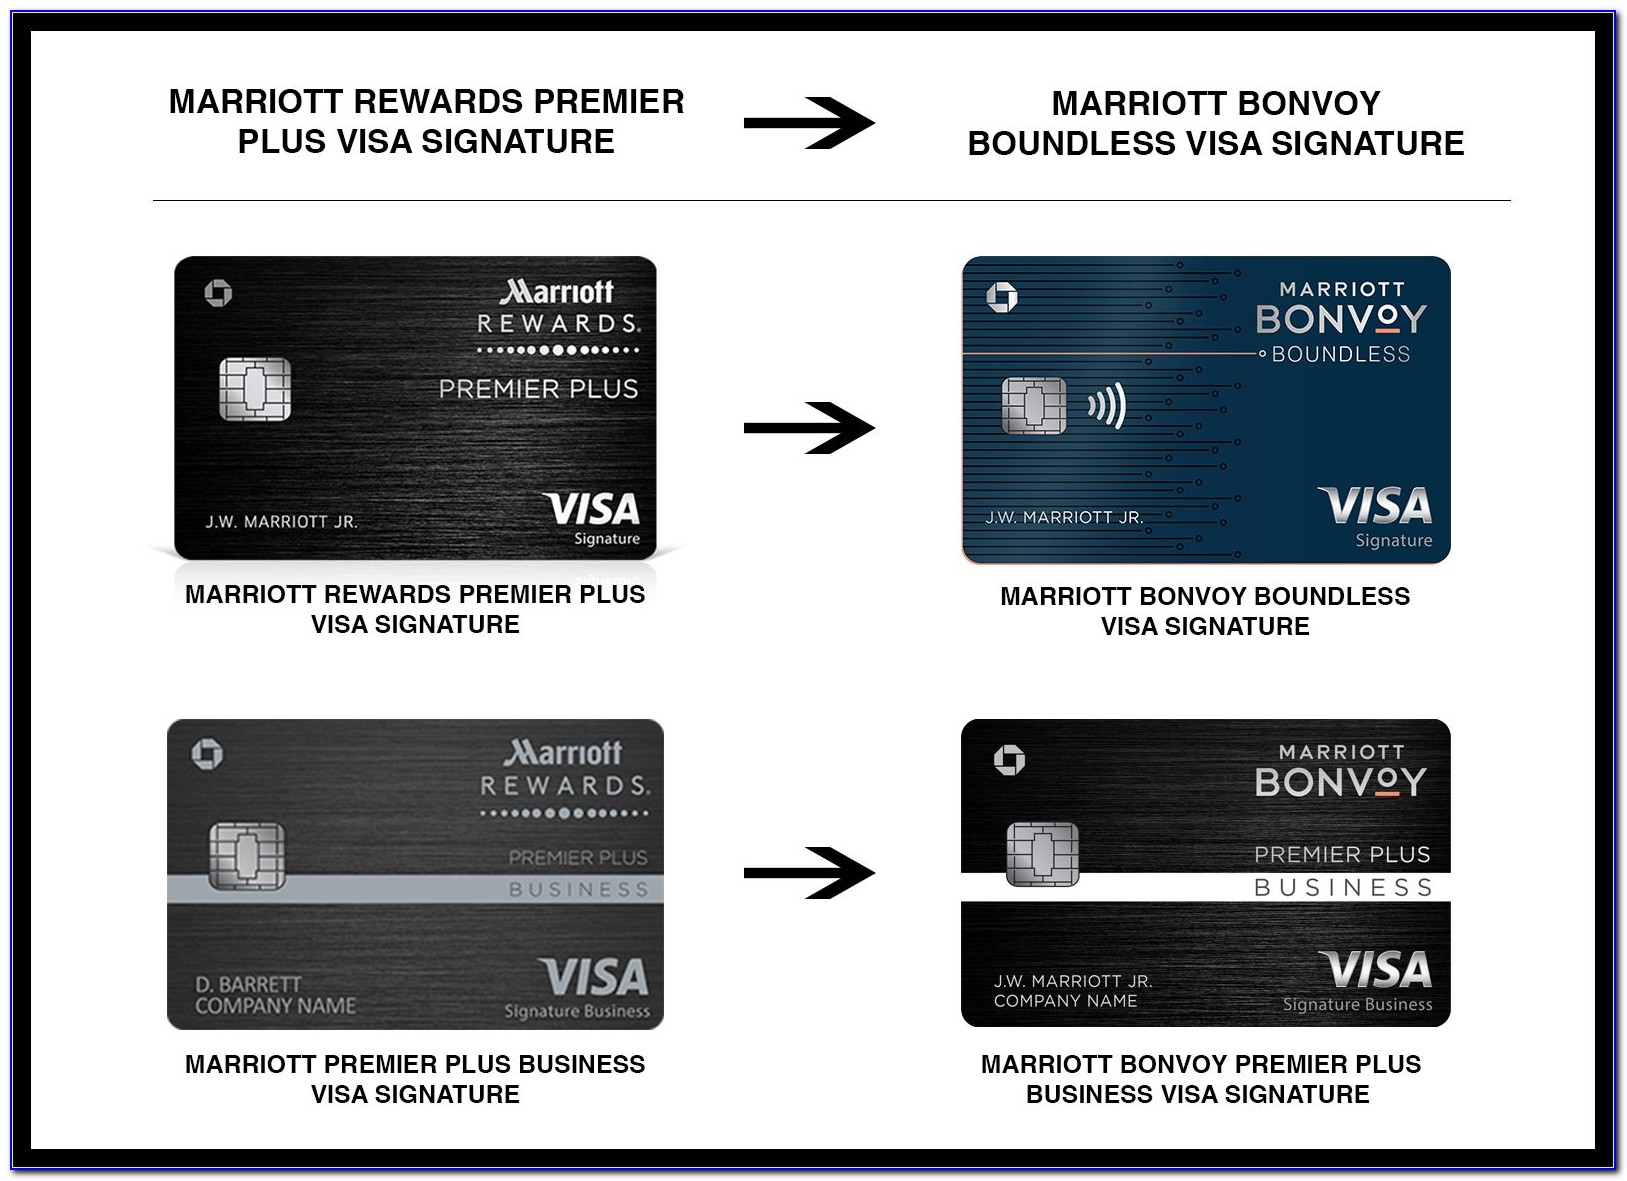 Chase Marriott Business Card Benefits